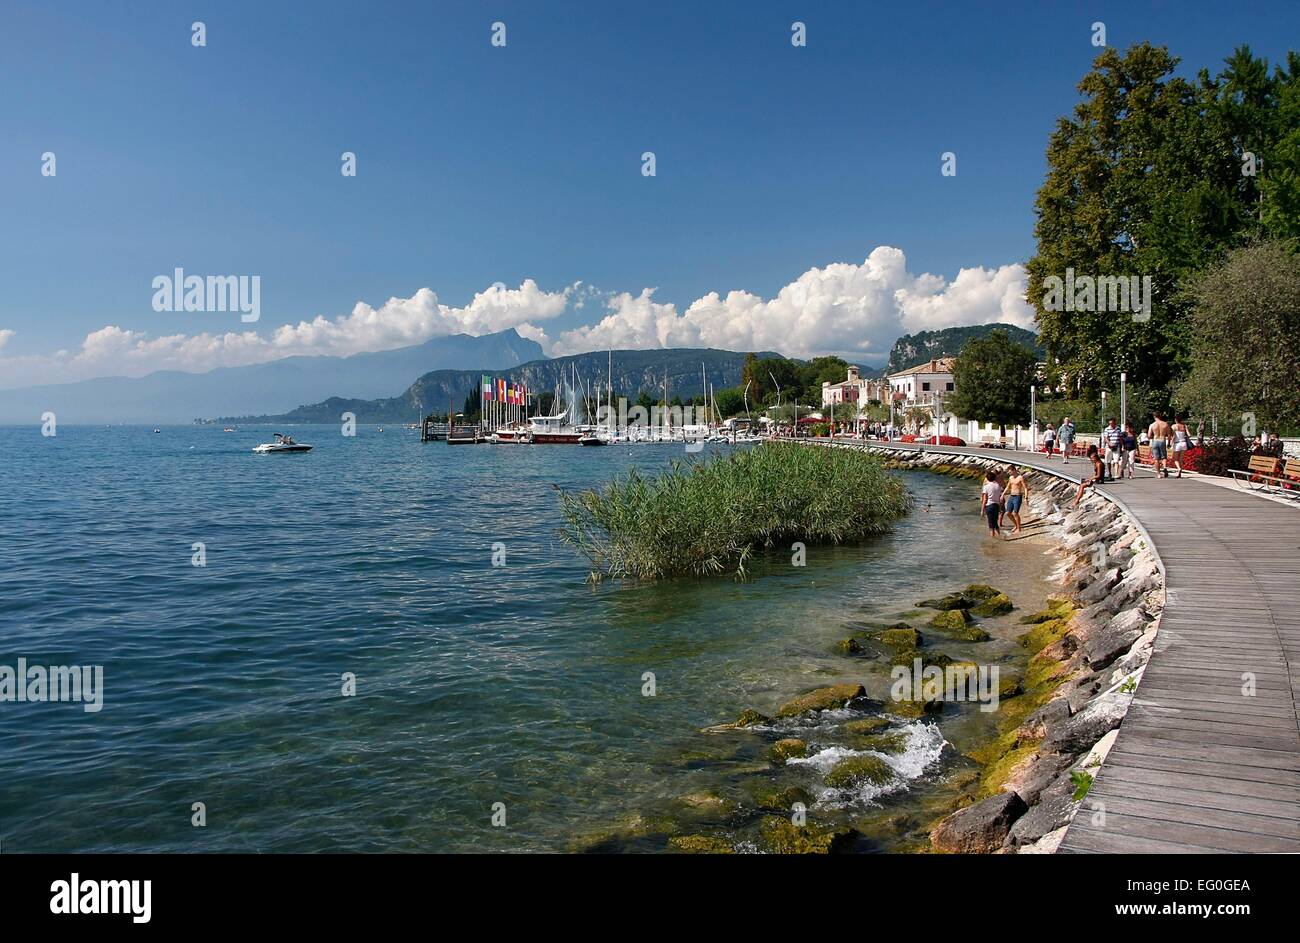 The waterfront of Bardolino invites you to sit down and relax. Lots of trees, including olive trees provide shade. From Lake Garda is always blowing a light and refreshing breeze. Bardolino is a town on the eastern shore of Lake Garda. Photo: Klaus Nowottn Stock Photo